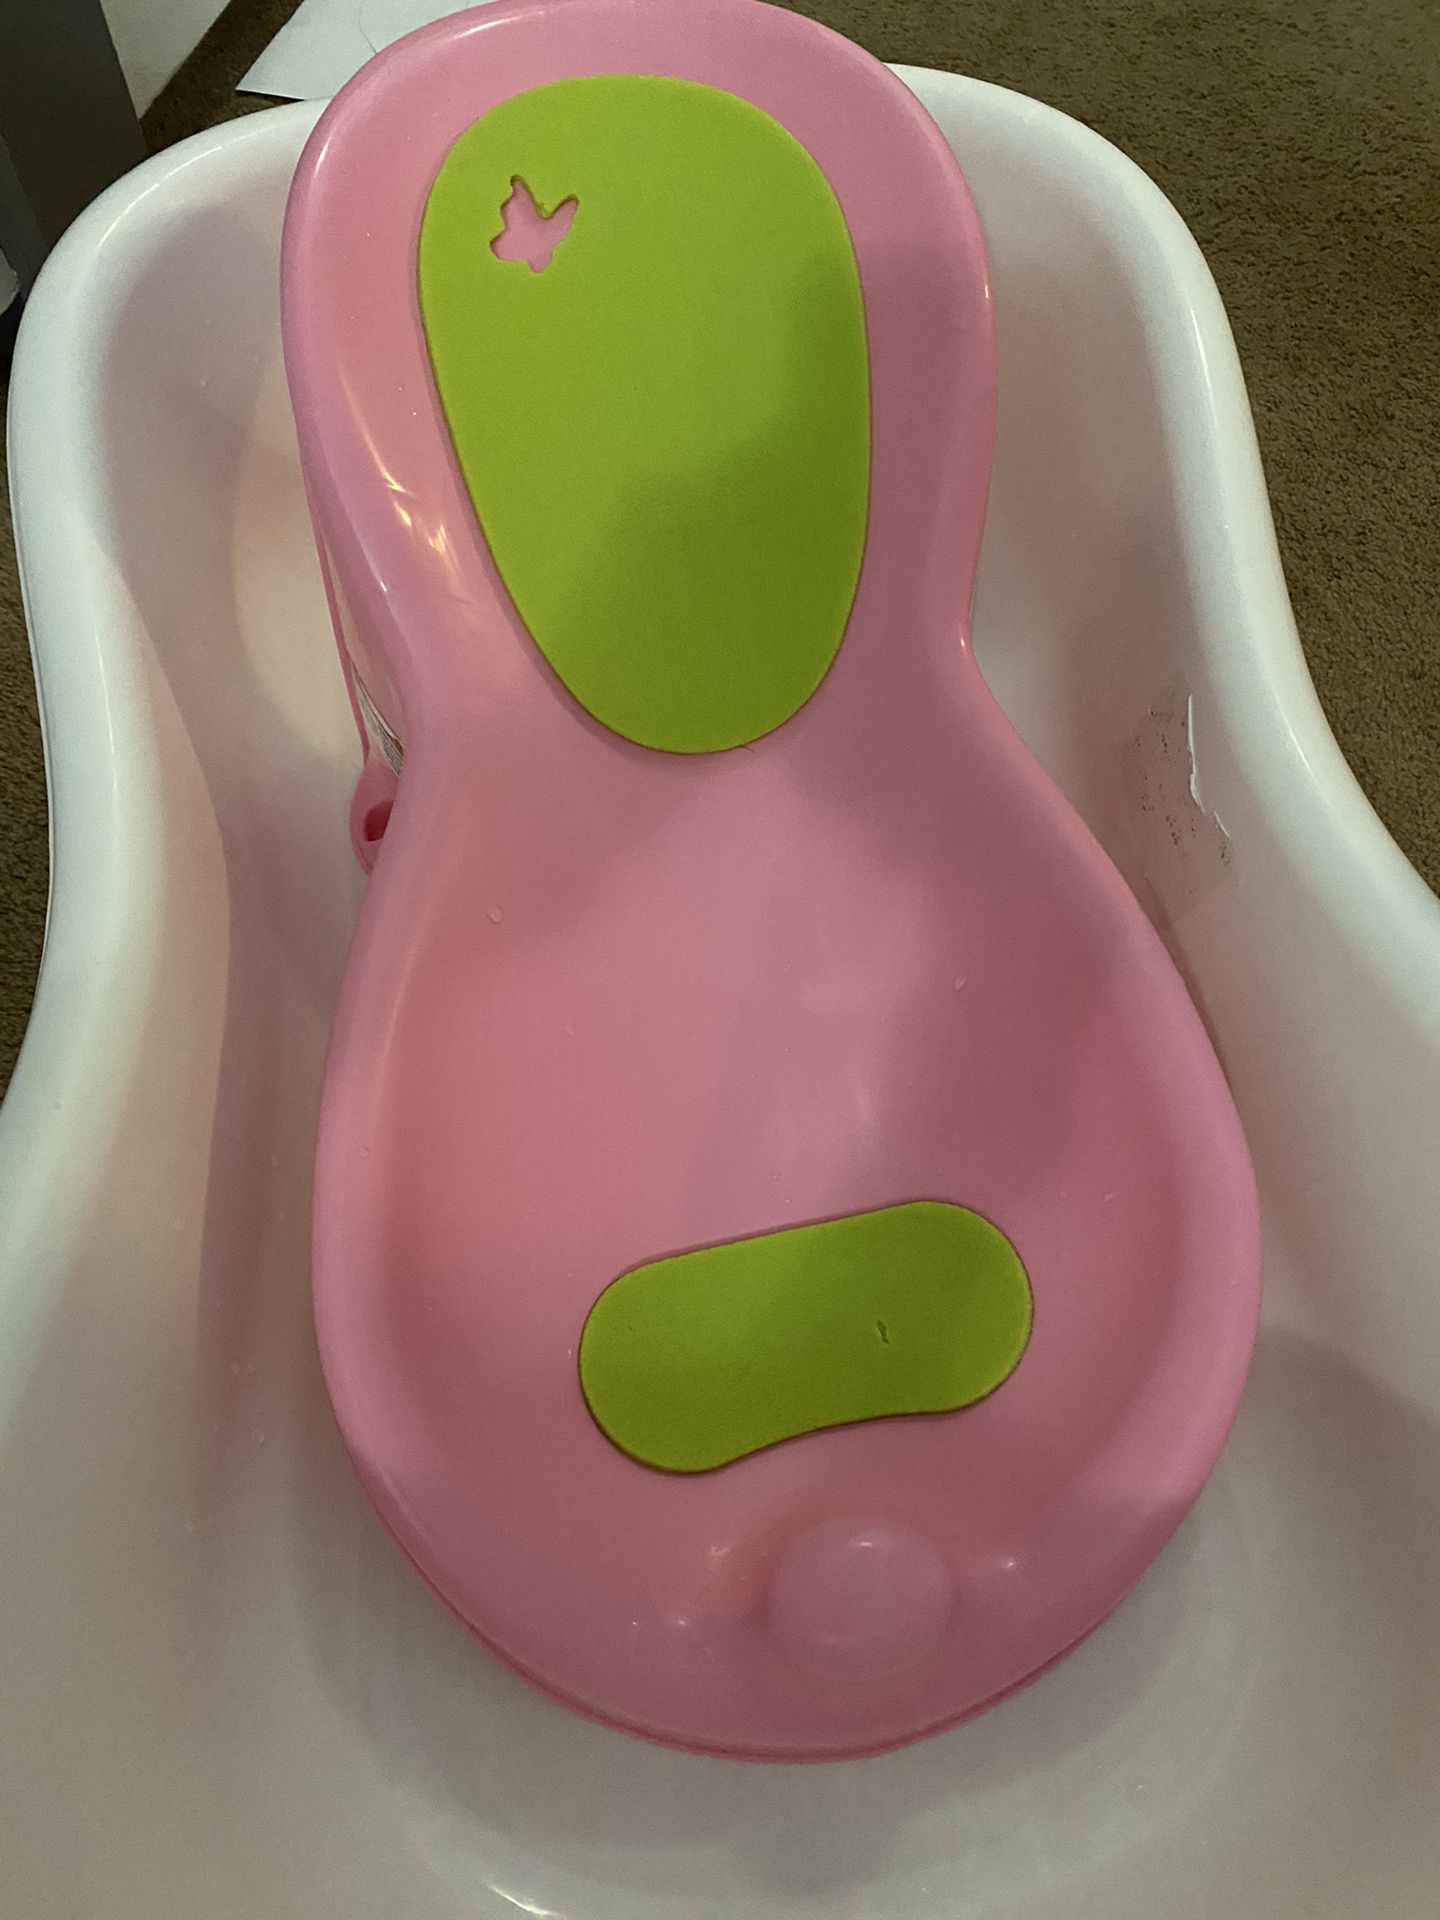 INFANT BATH TUB MADE BY Summer bright like brand new